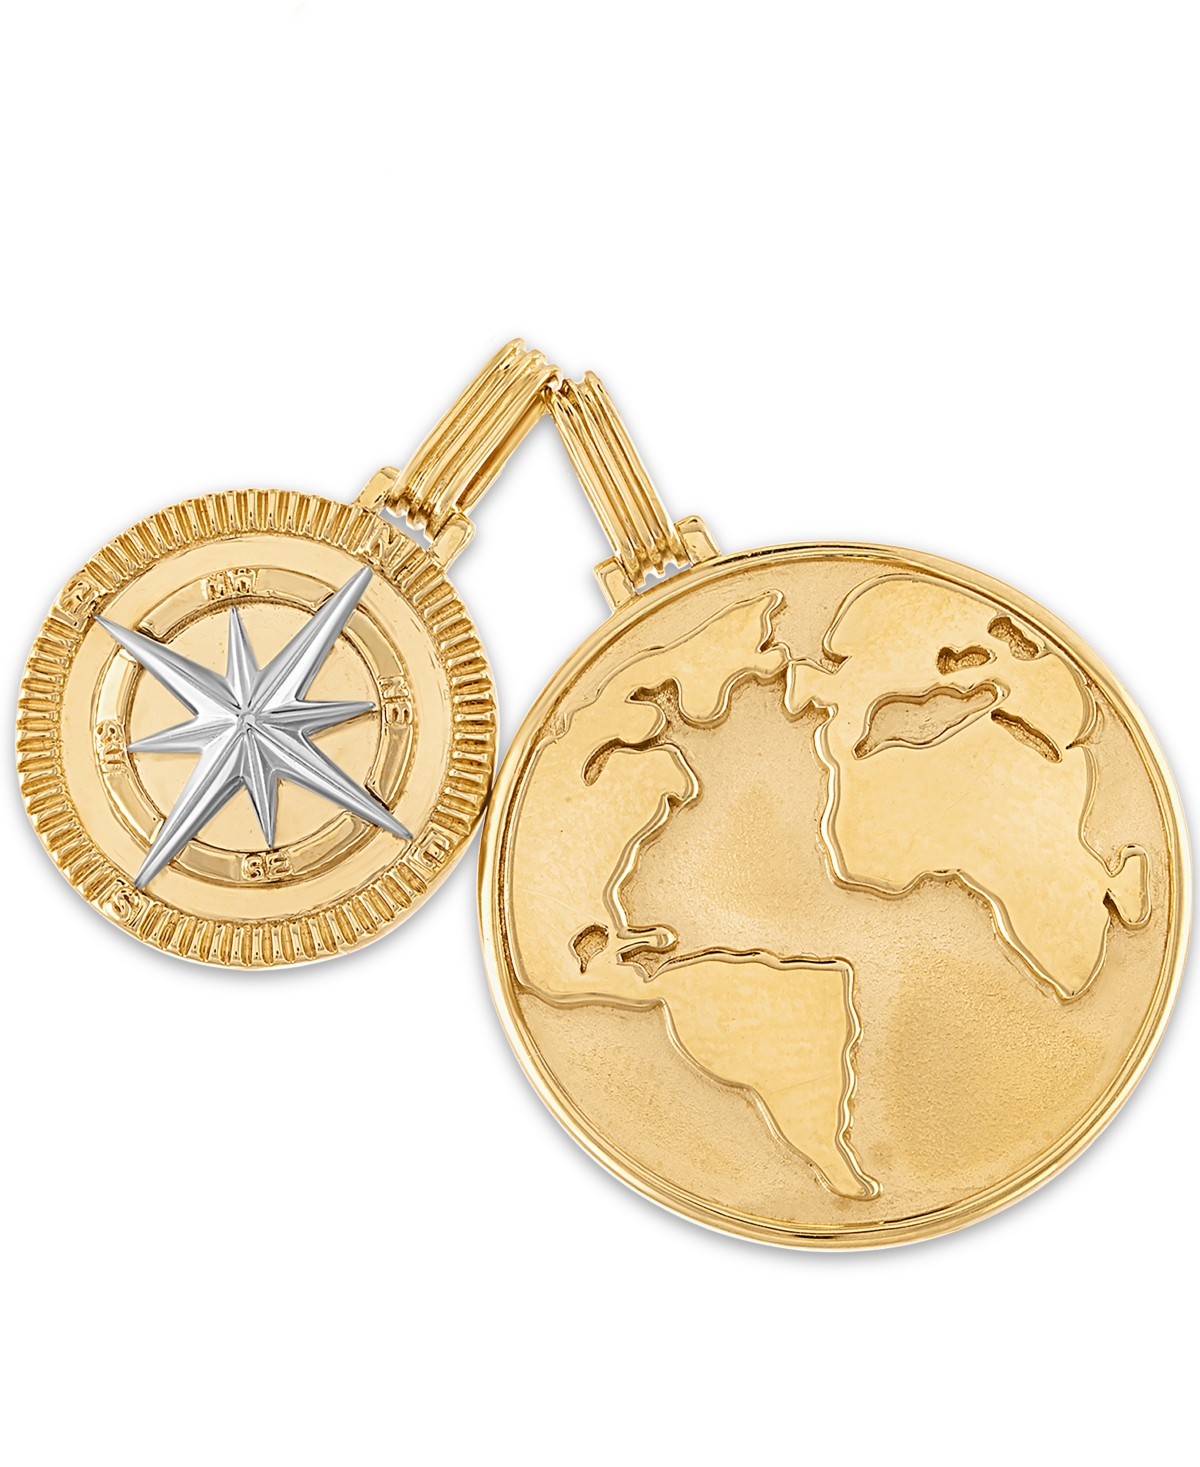 2-Pc. Set Globe & Compass Amulet Pendants in 14k Gold-Plated Sterling Silver, Created for Macy's - Gold Over Silver